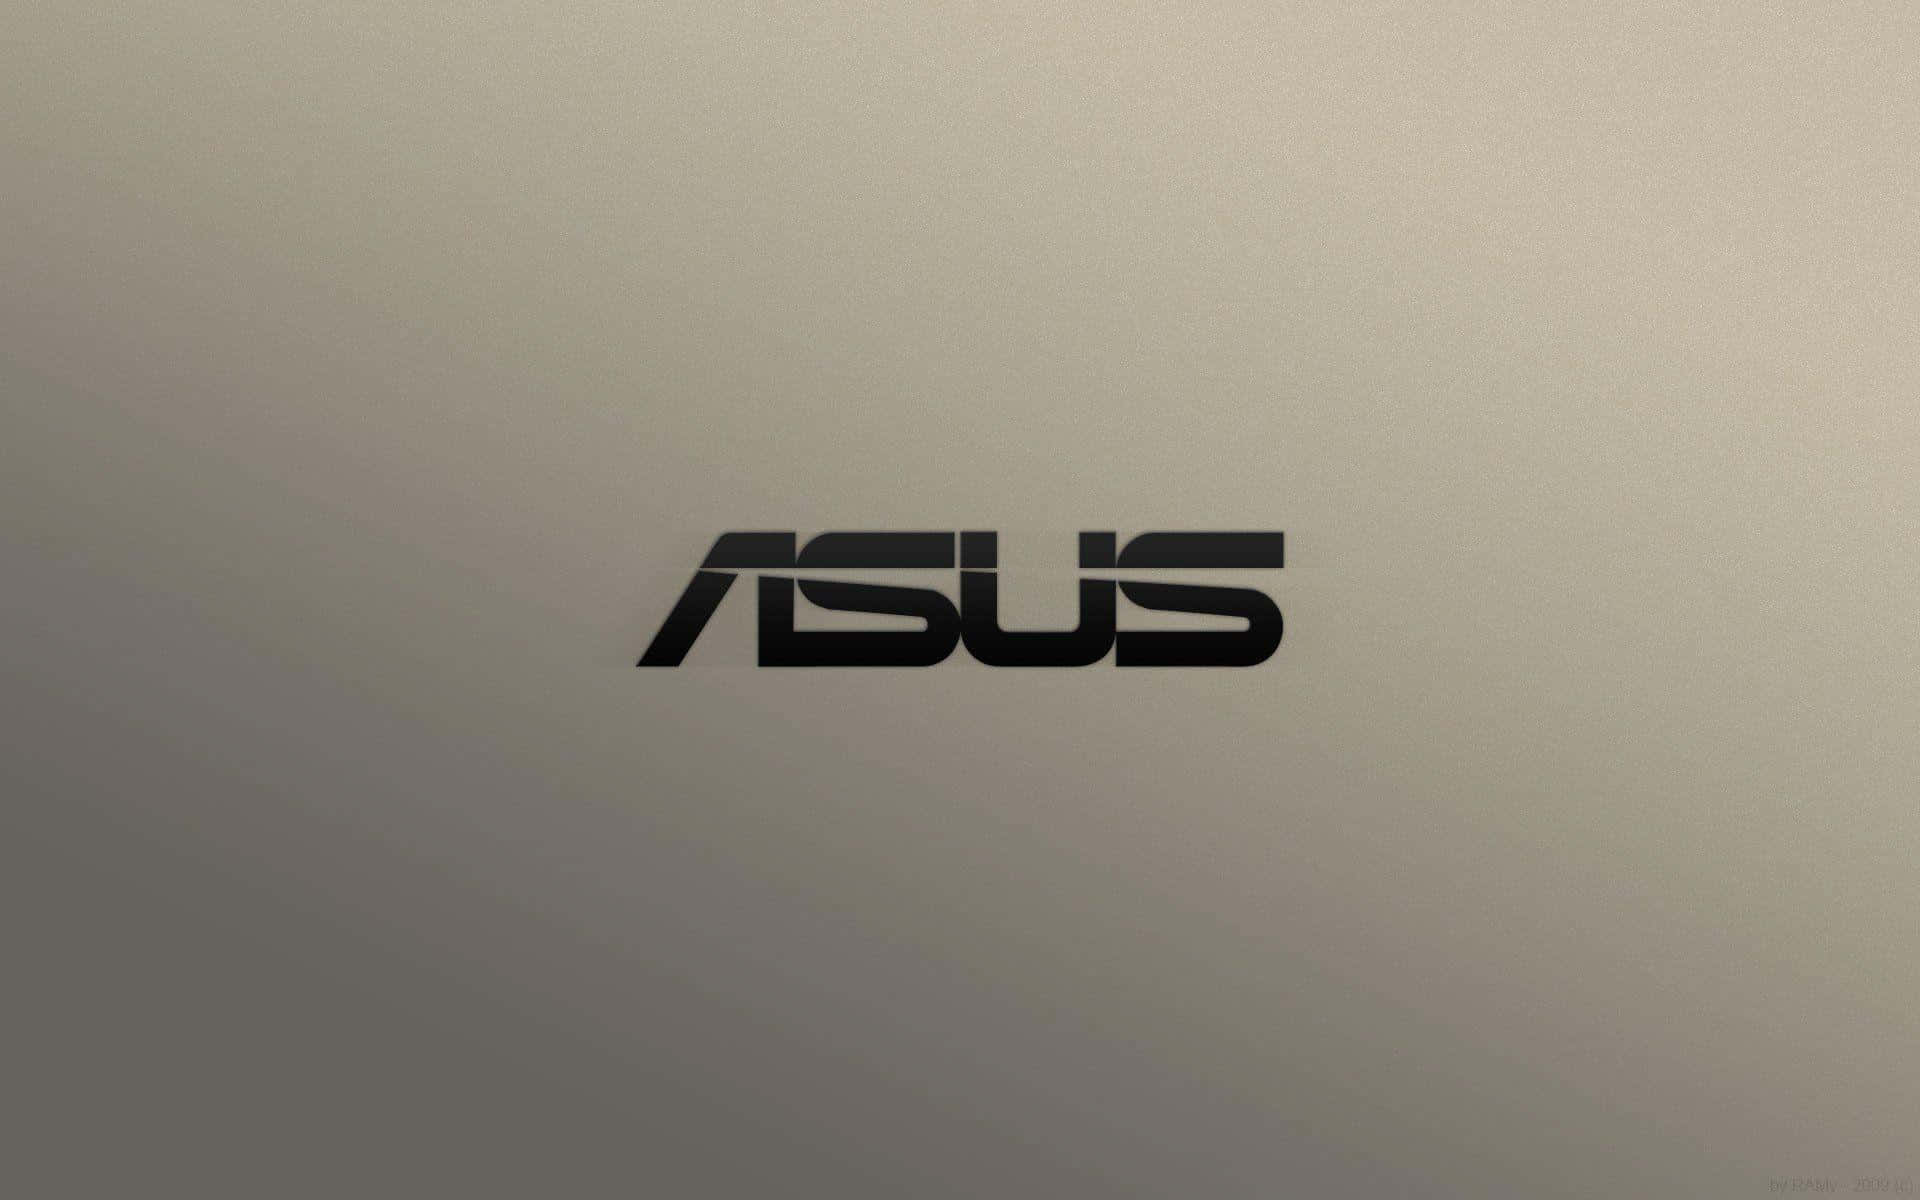 Get ahead with the powerful ASUS